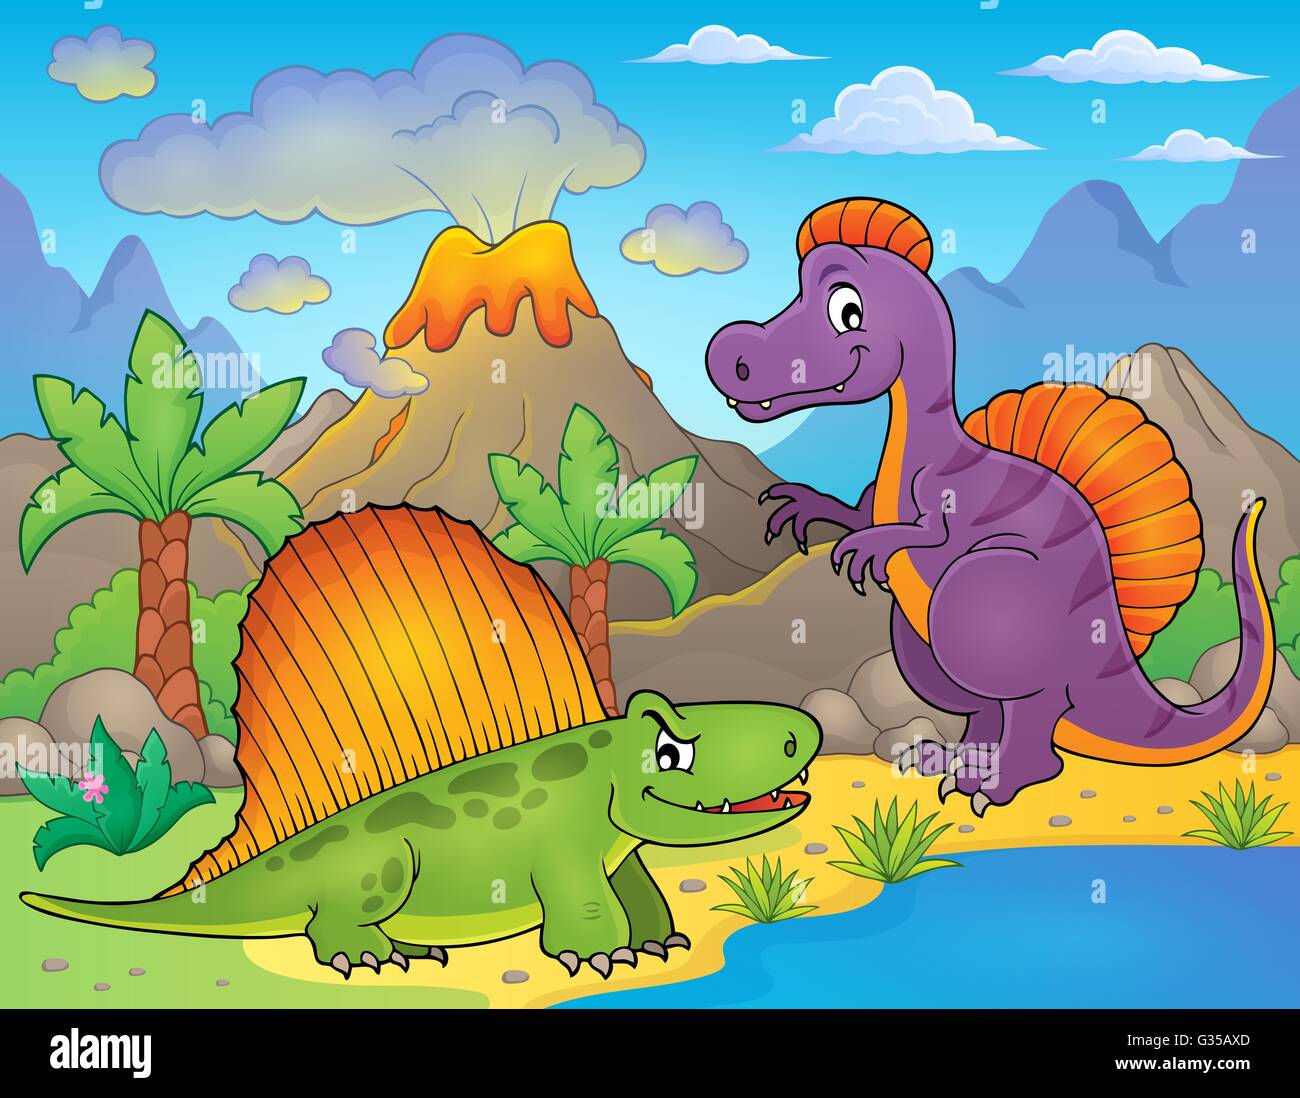 Image with dinosaur thematics 1 - picture illustration. Stock Photo